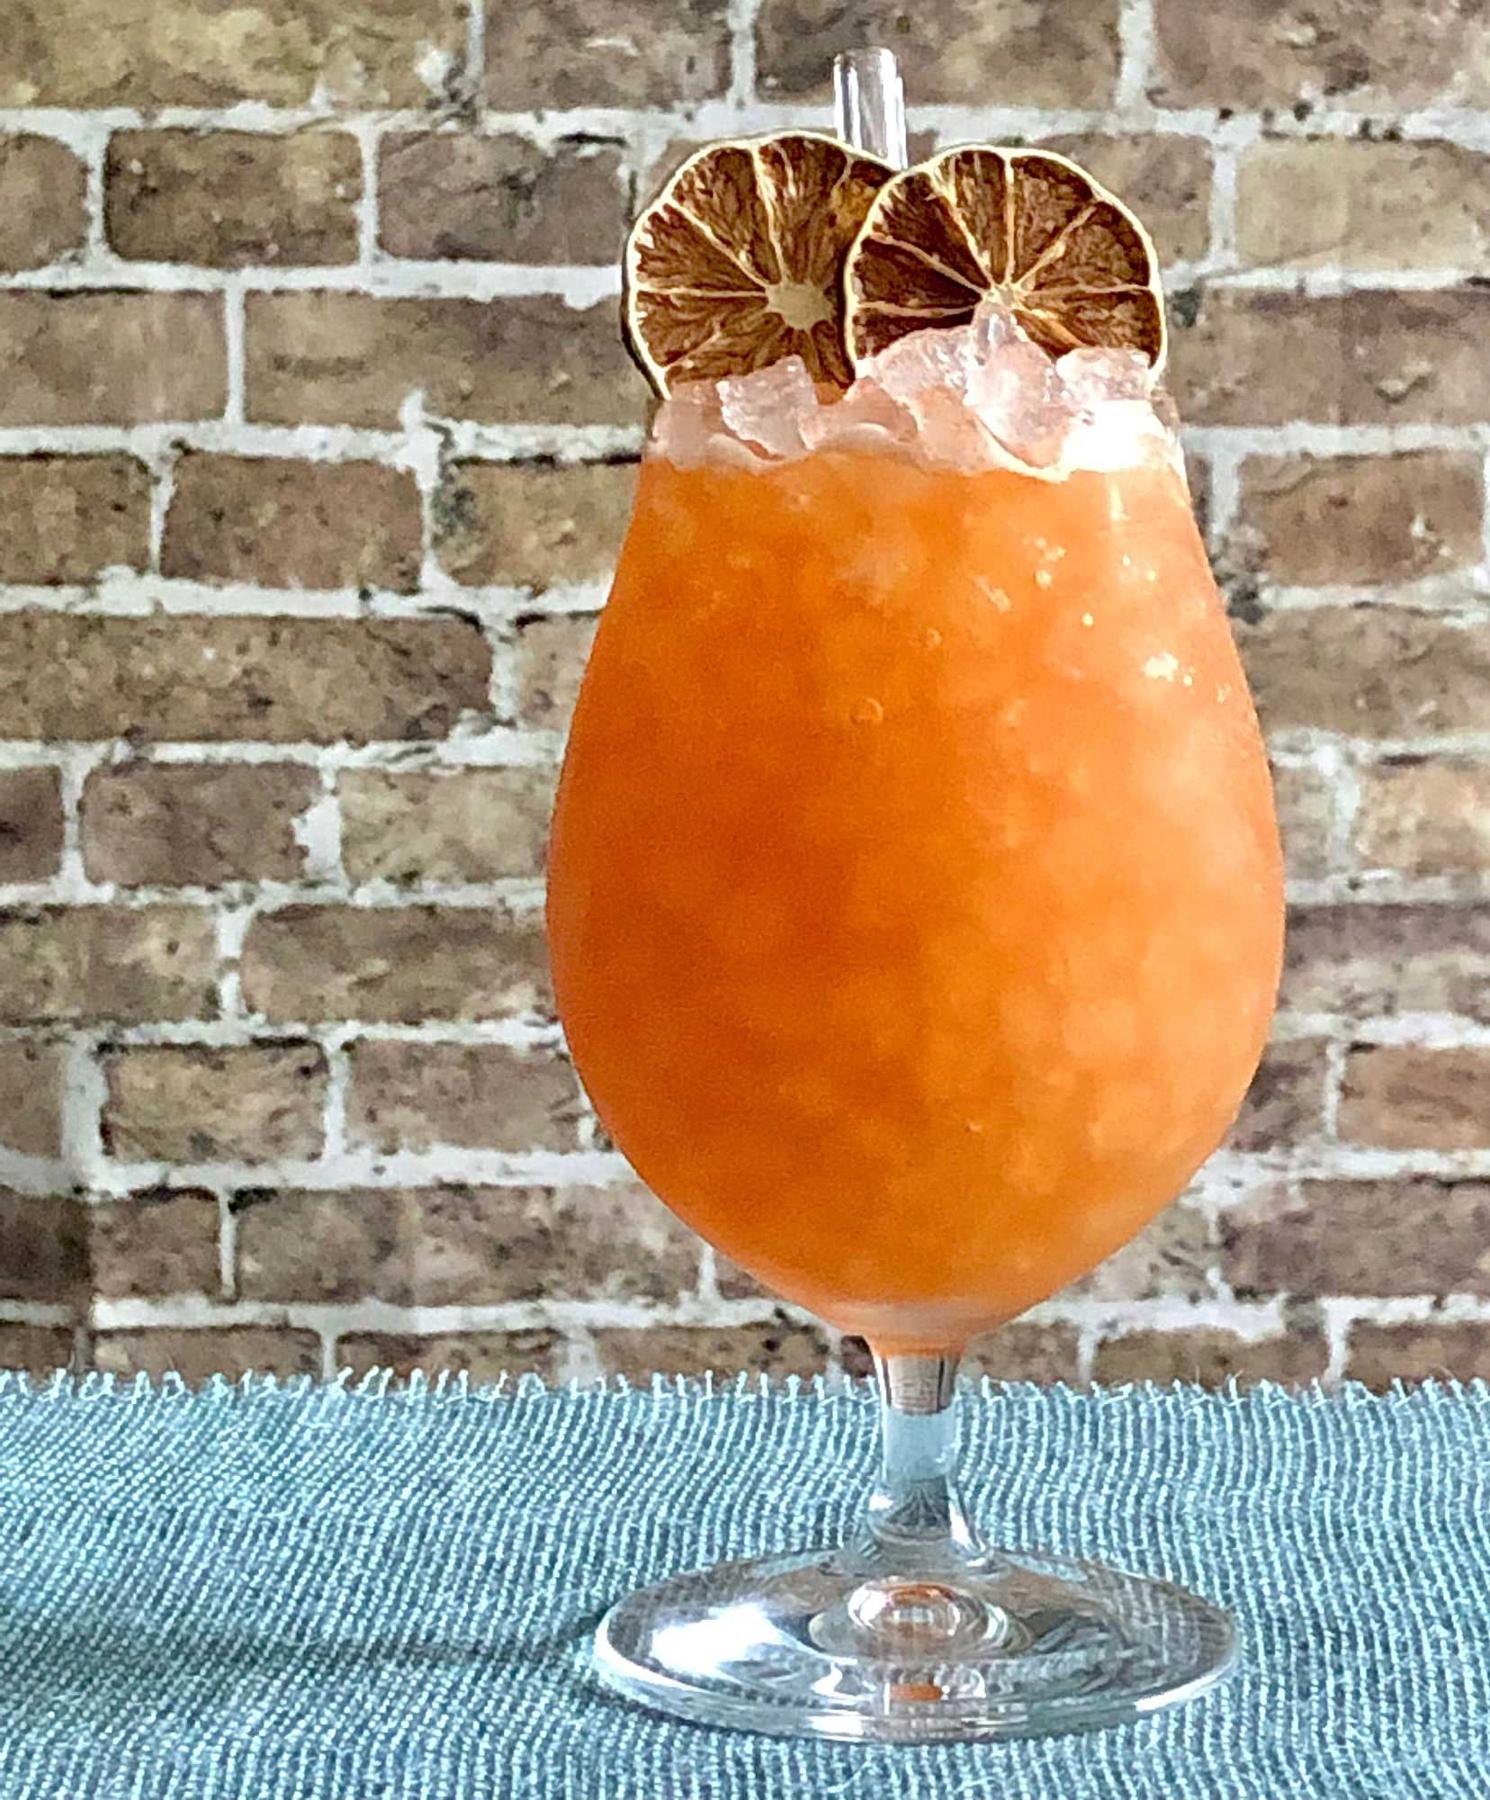 An example of the Anna Skytte’s Raid, the mixed drink (drink), by Luiggi Uzcategui, Big Orange, Little Rock, AR, featuring KRONAN Swedish Punsch, rye whiskey, lime juice, Smith & Cross Traditional Jamaica Rum, Carlsbad Becherovka Bitter, Angostura bitters, St. Elizabeth Allspice Dram, and lime wheel; photo by Lee Edwards